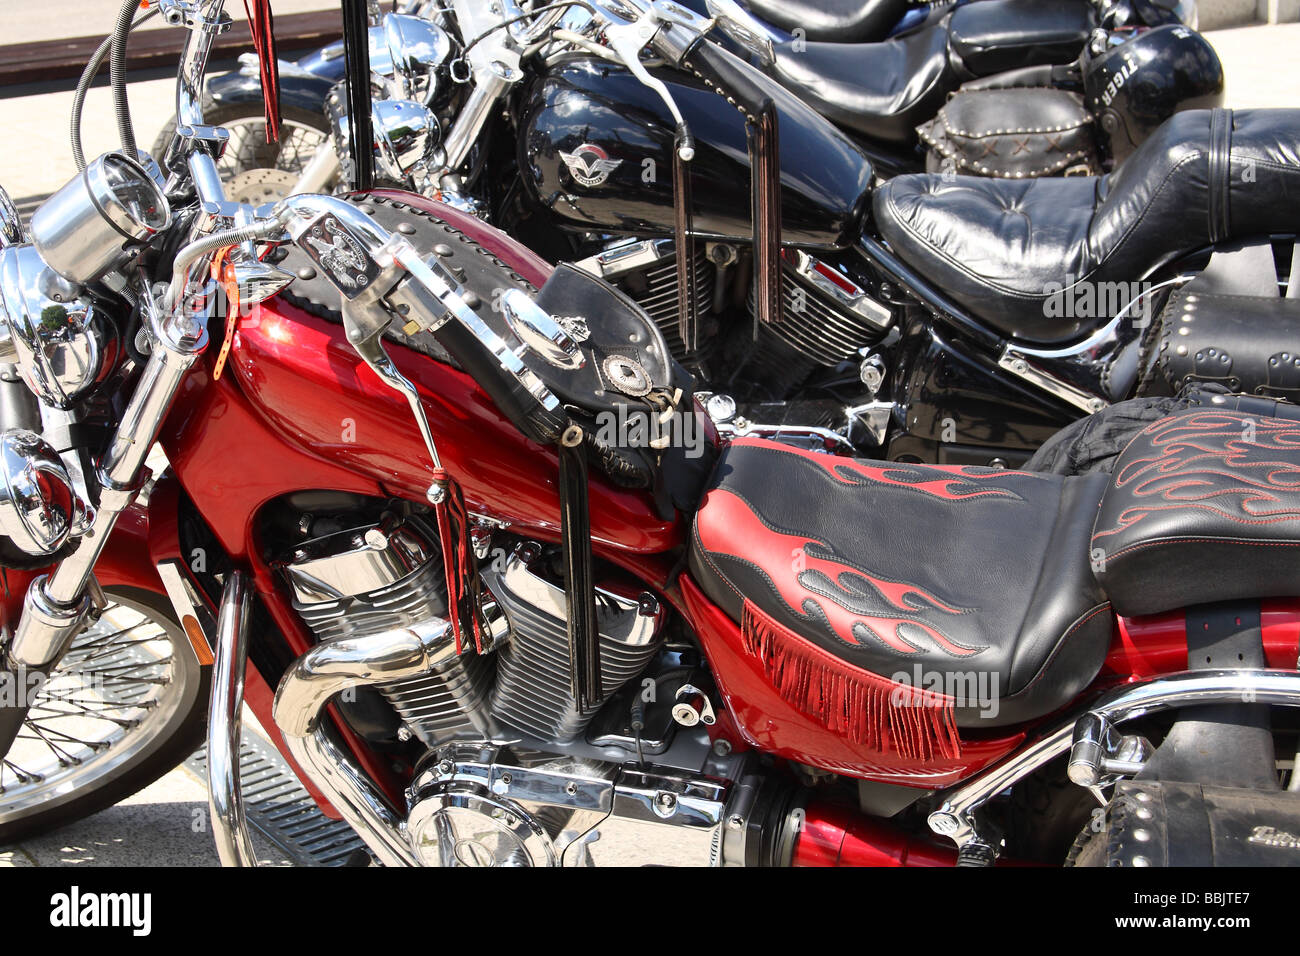 Motorcycle close up. Stock Photo